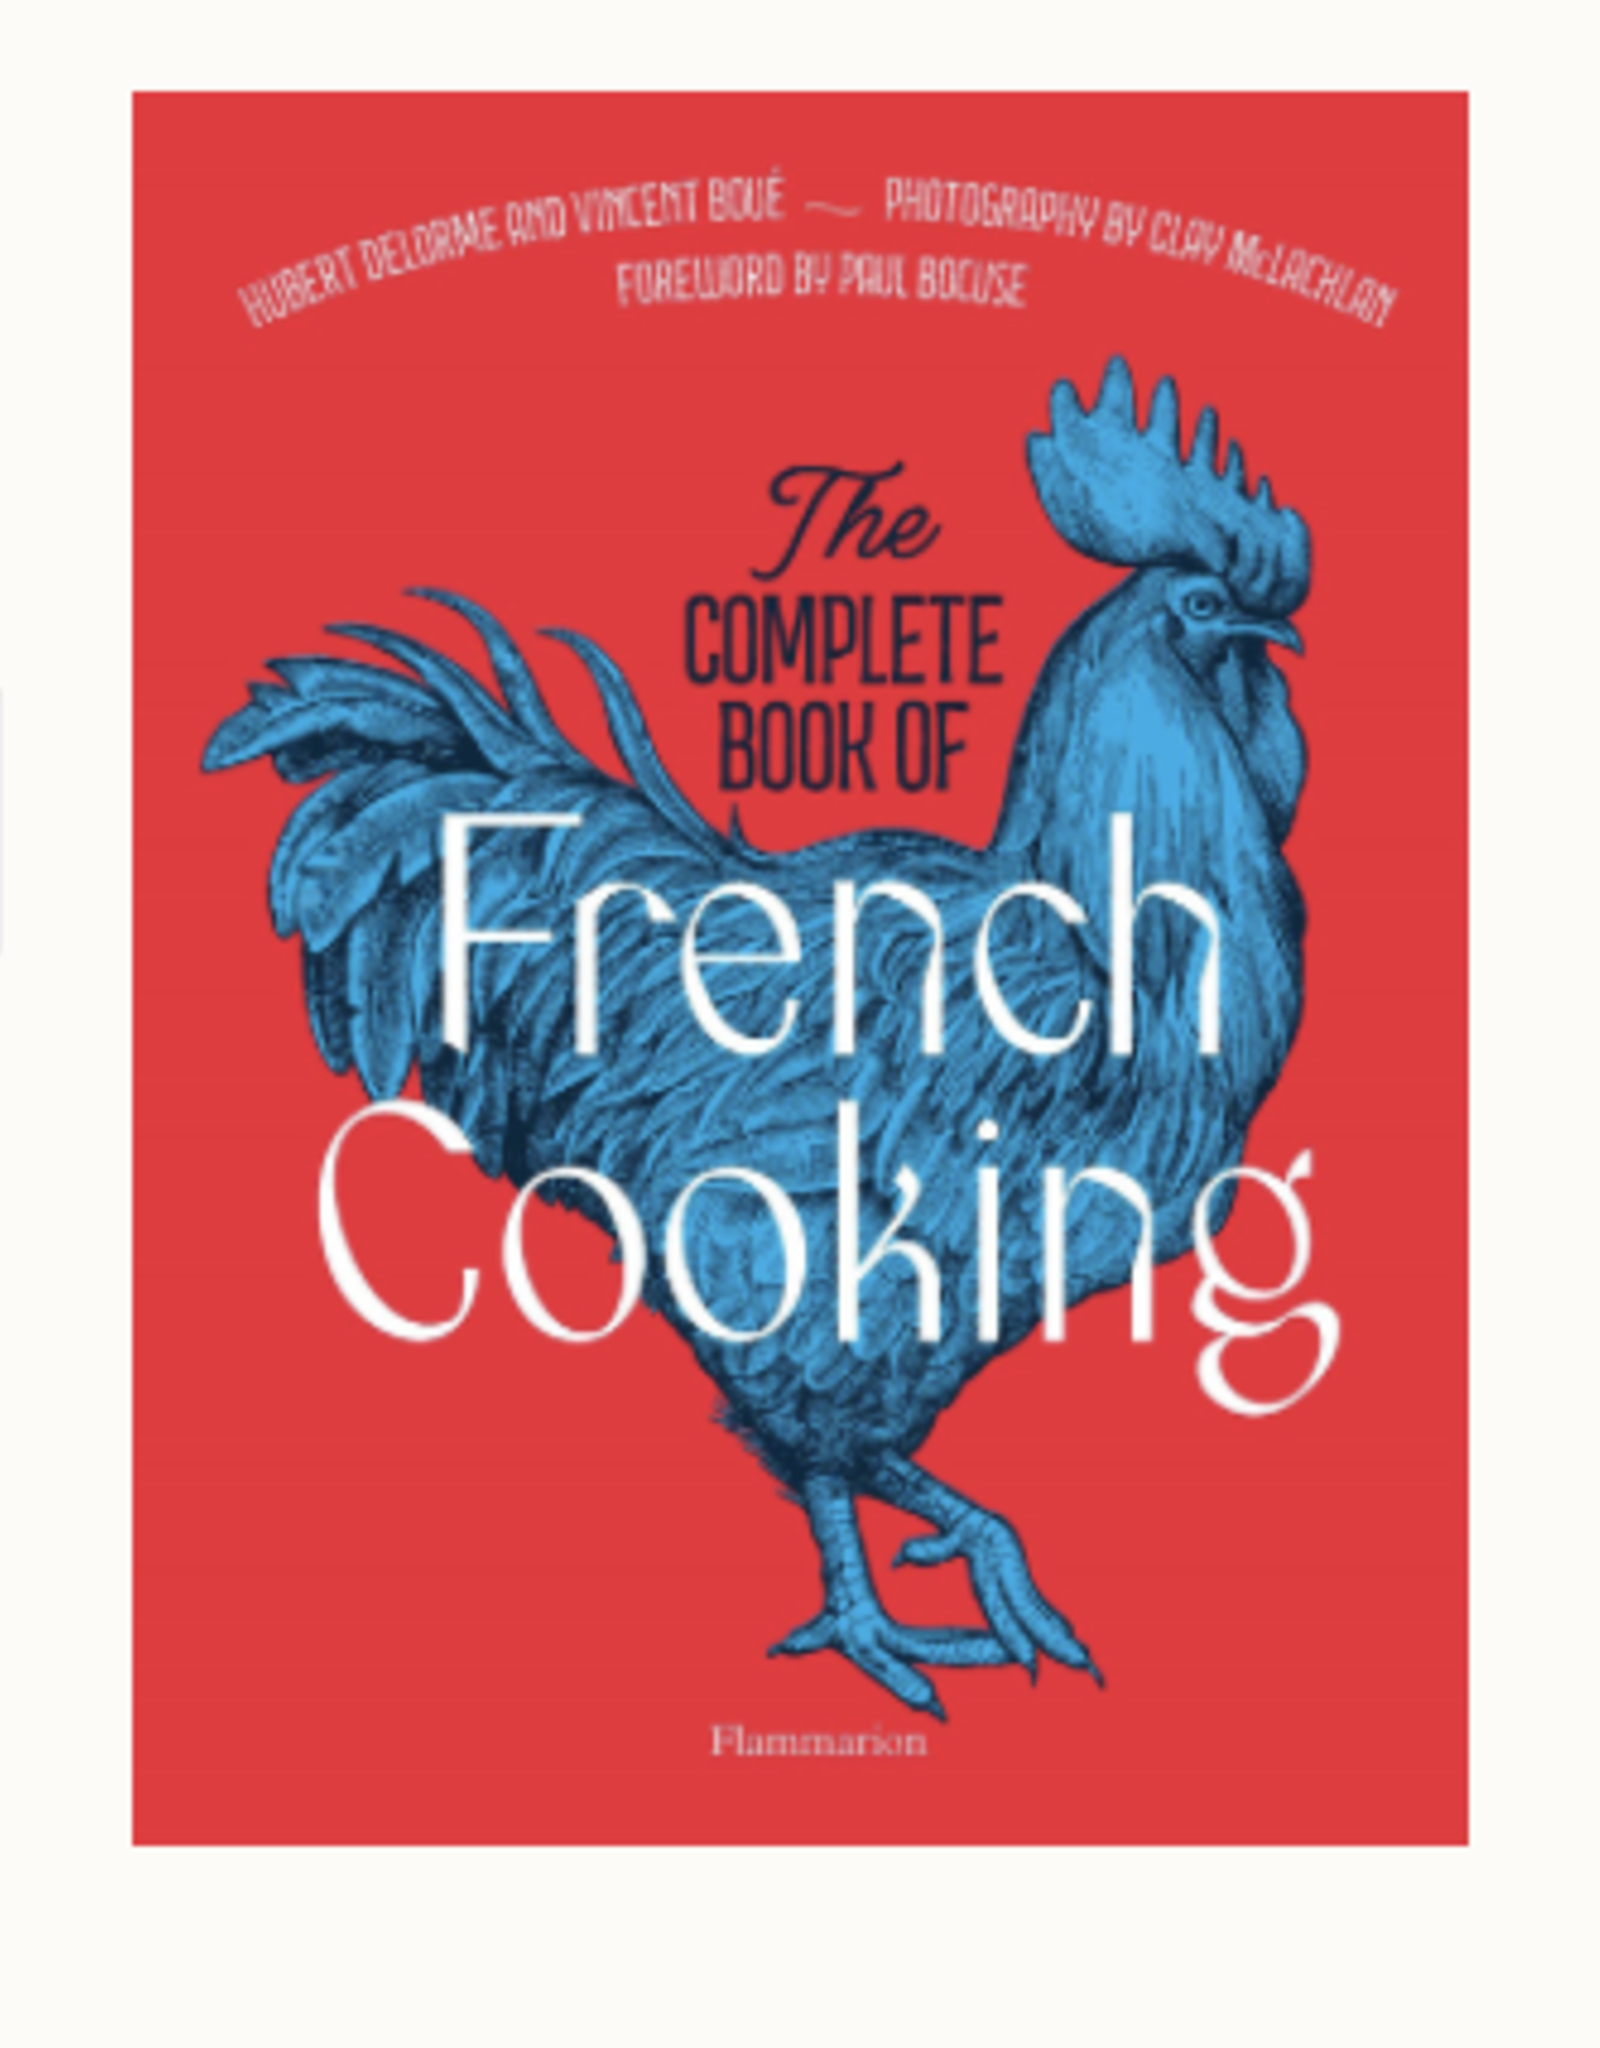 Complete Book of French Cooking by Hubert Delorme